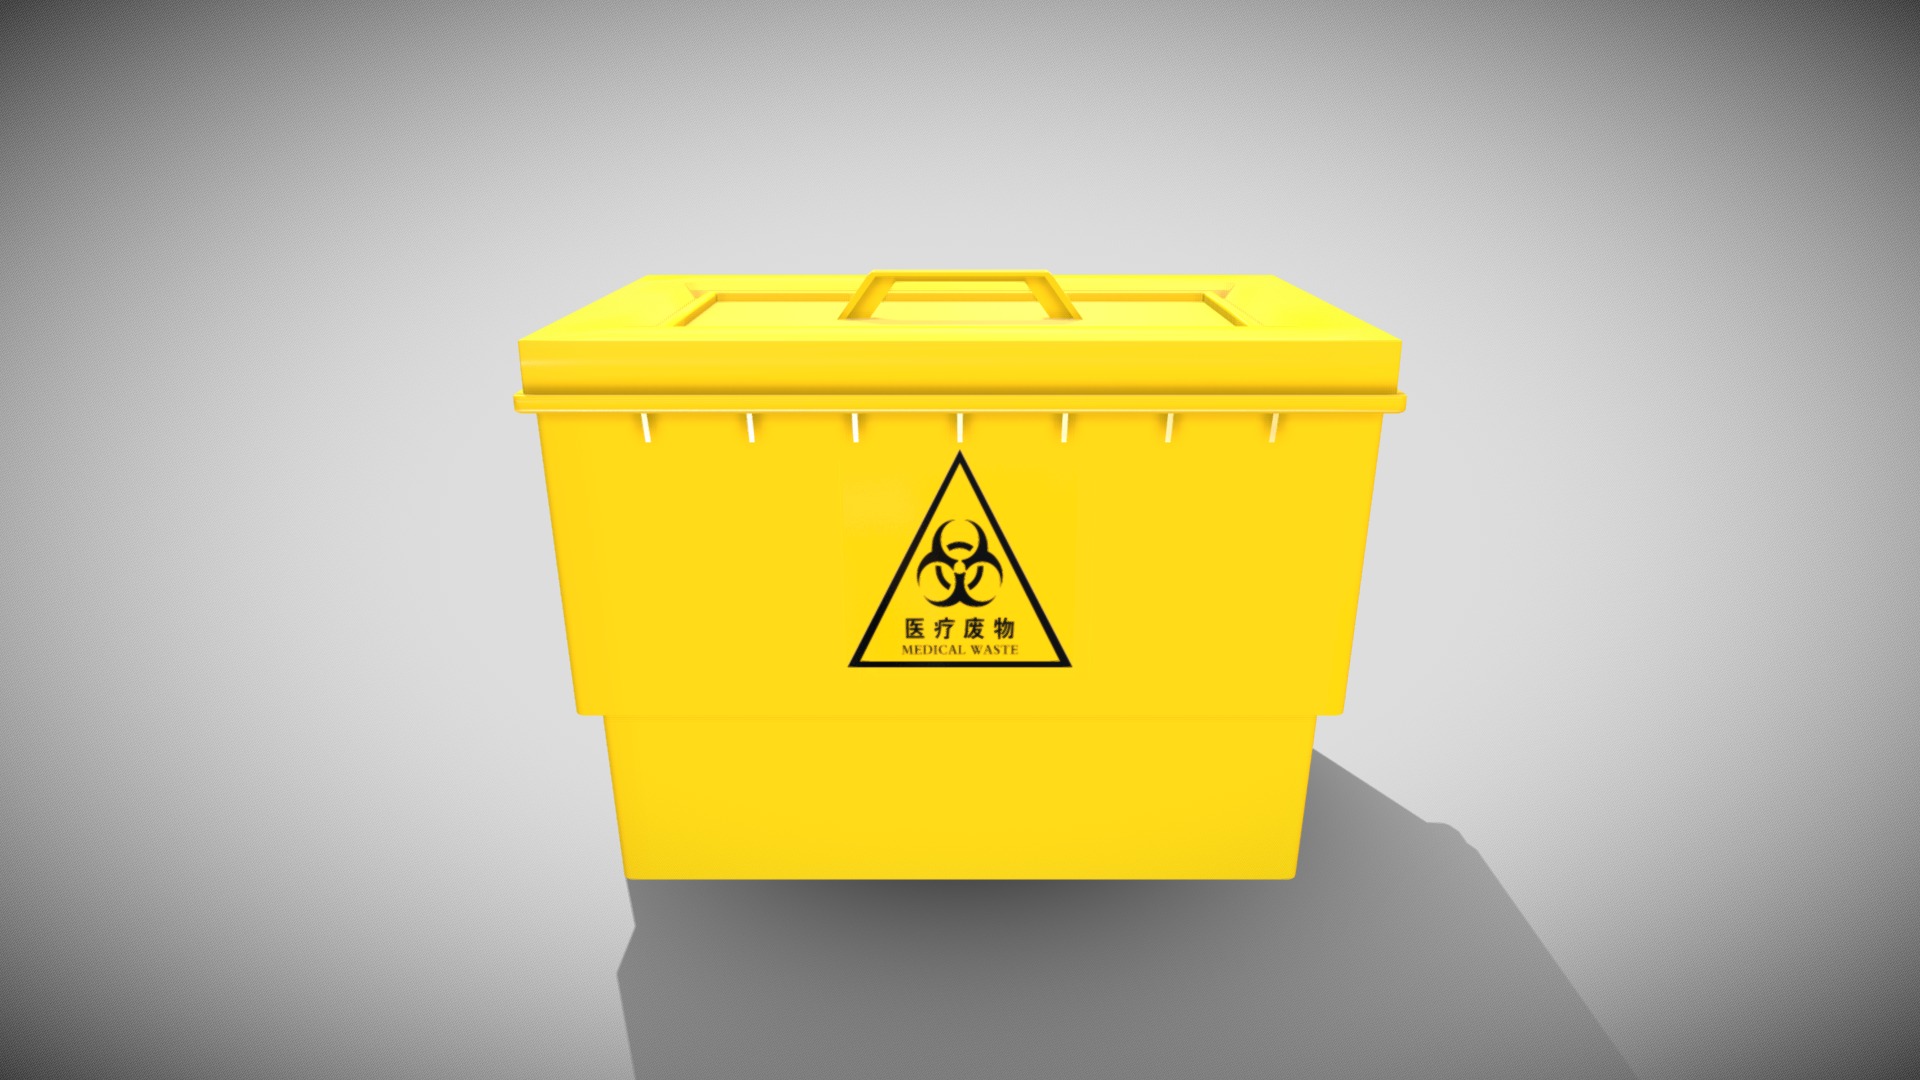 3D model Bio Waste Bin - This is a 3D model of the Bio Waste Bin. The 3D model is about a yellow box with a black logo.